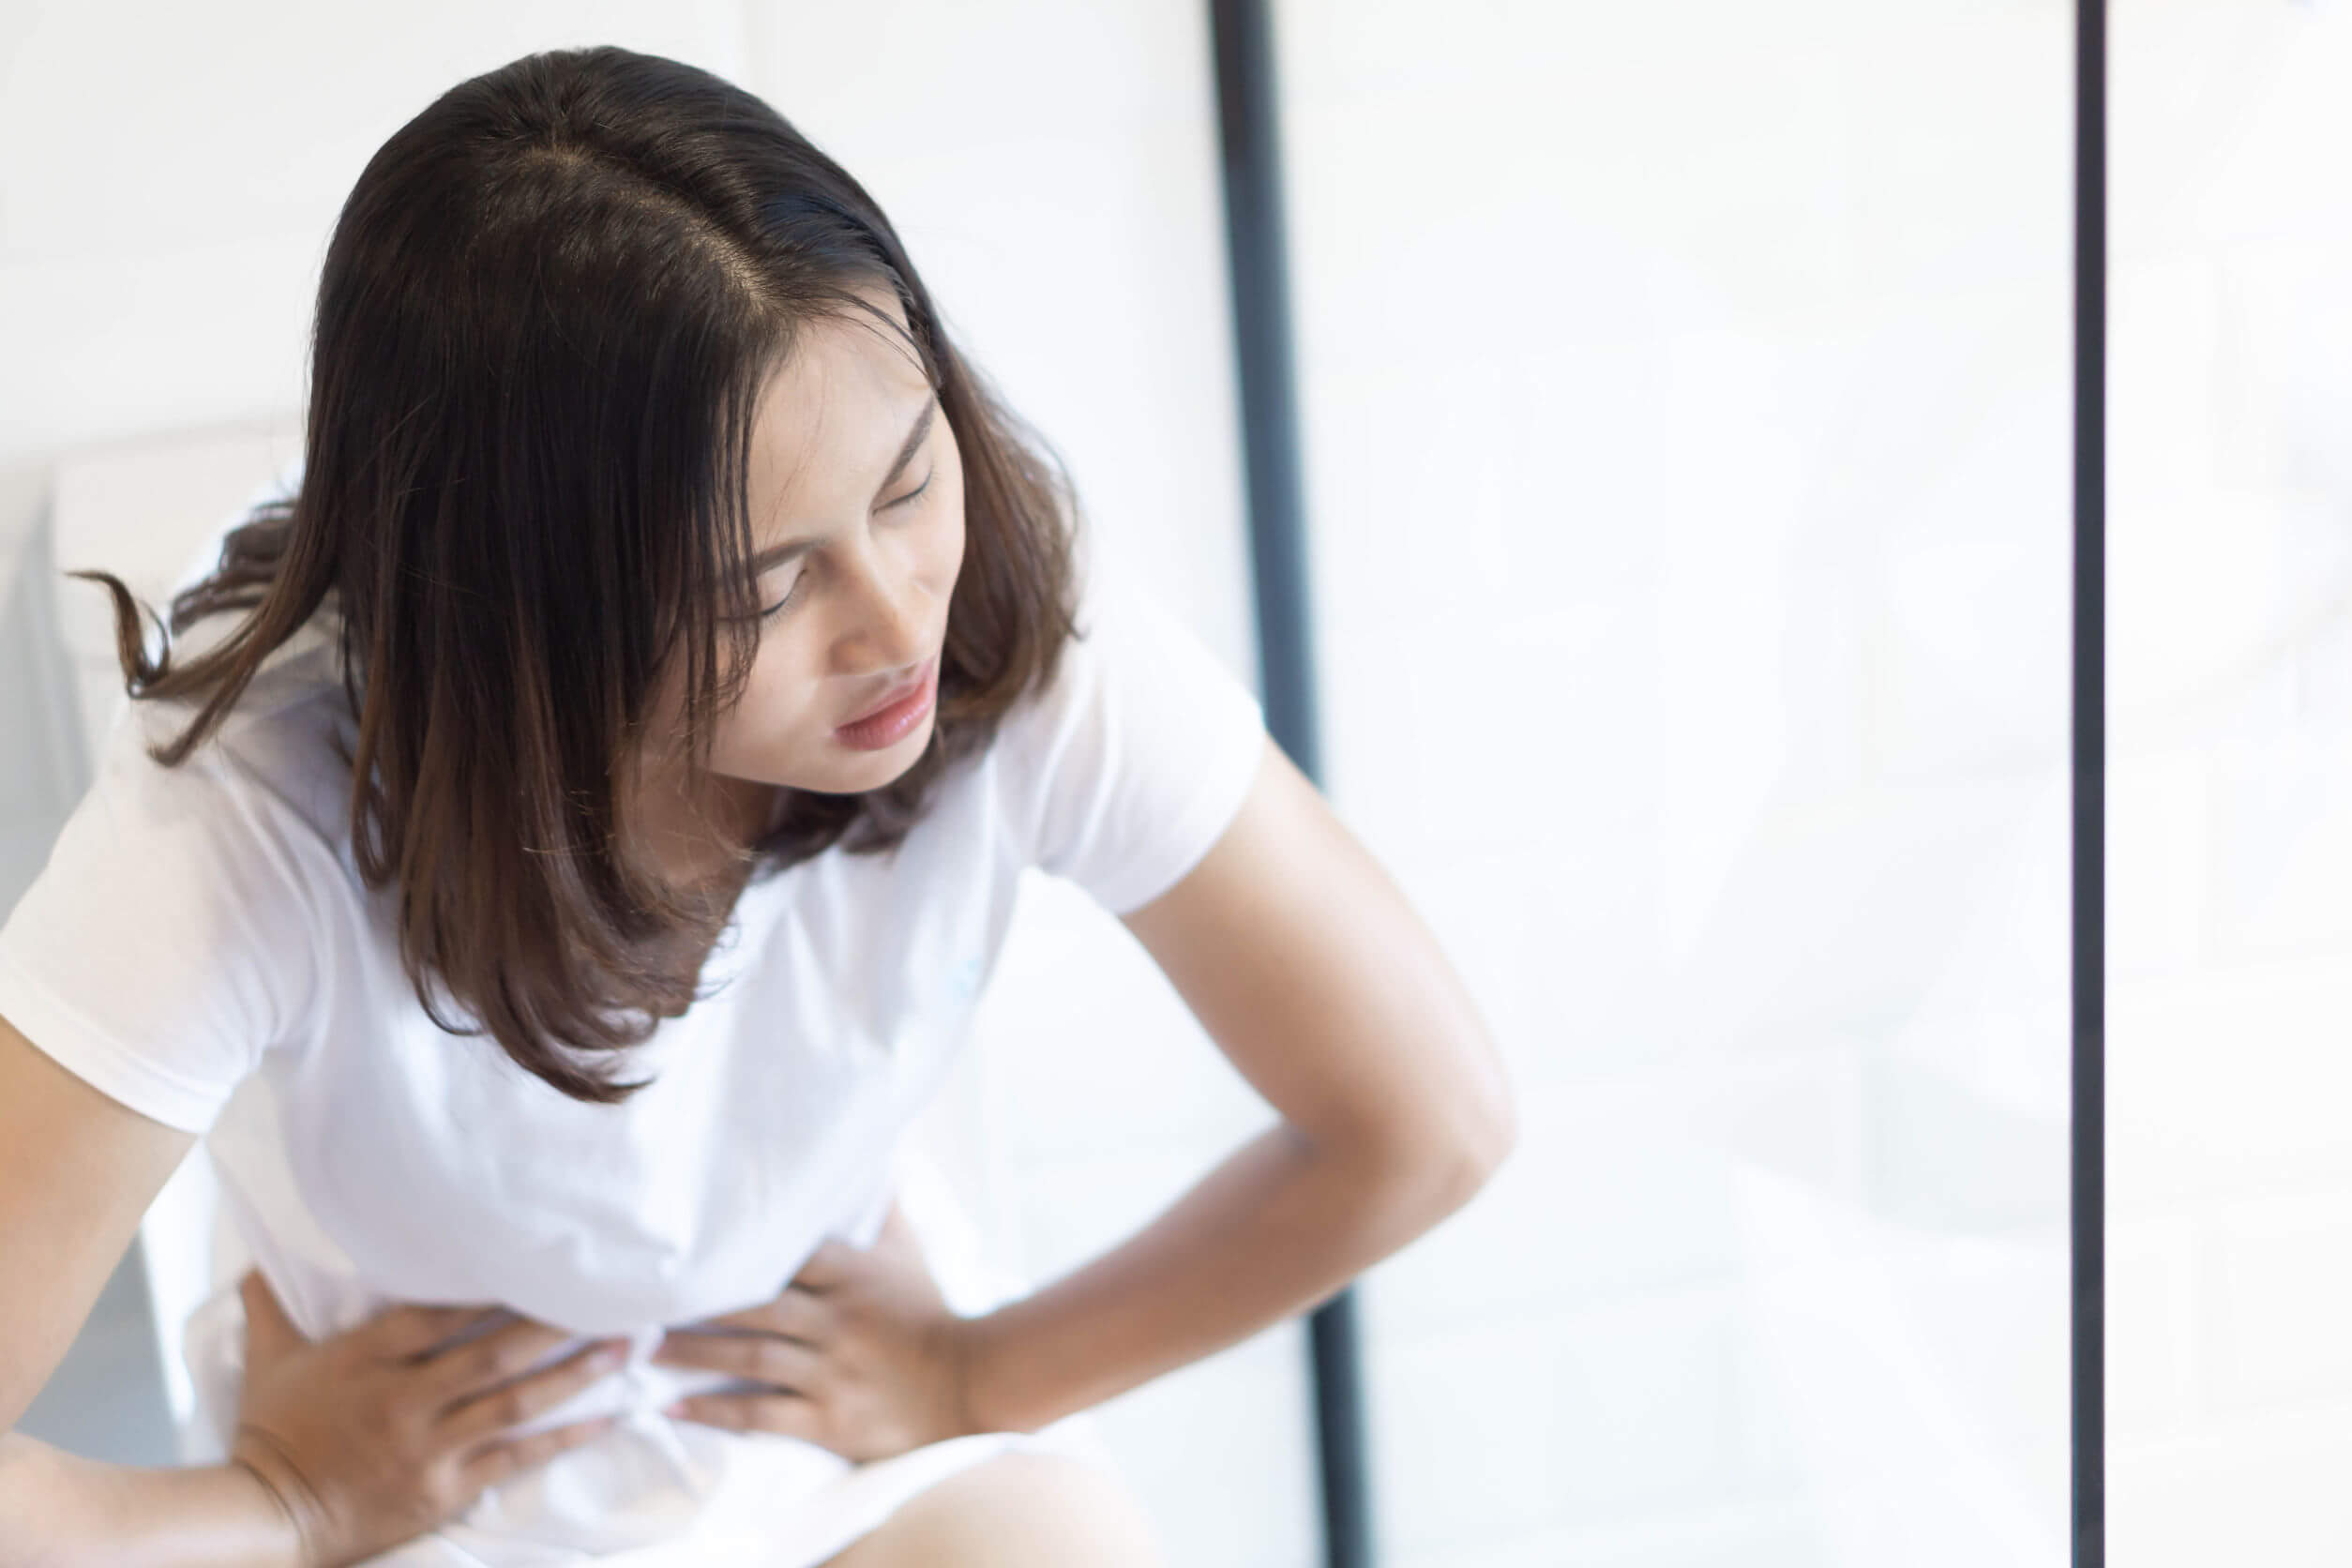 Cystitis is more common in women.